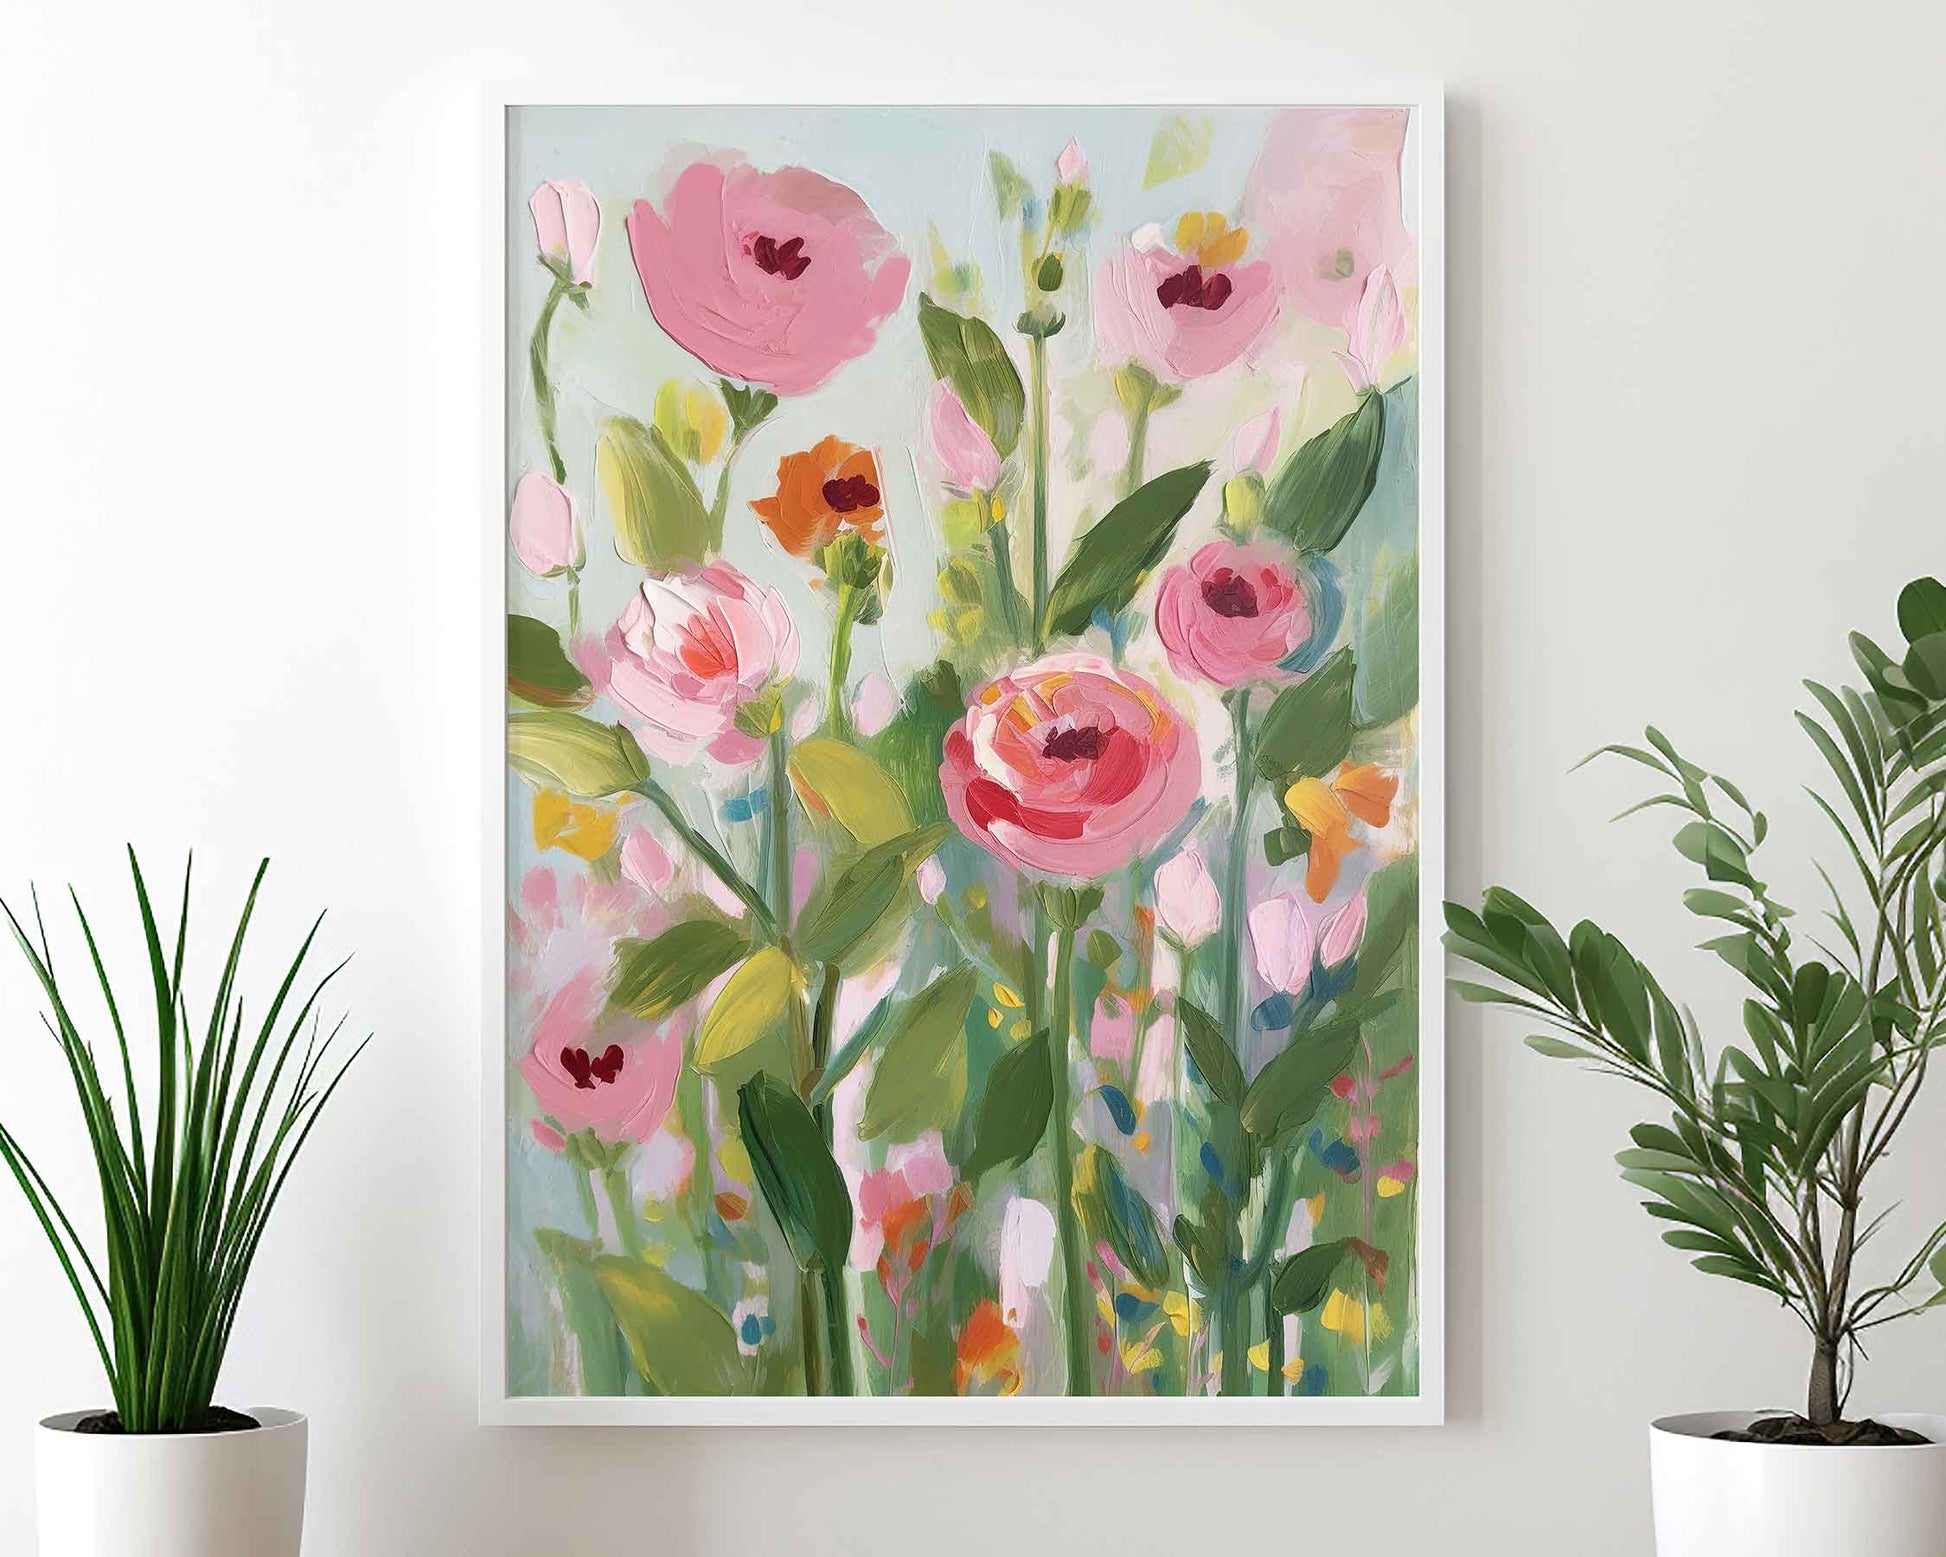 Framed Image of Pink Flowers Vintage Abstract Oil Paintings Wall Art Poster Print Gift